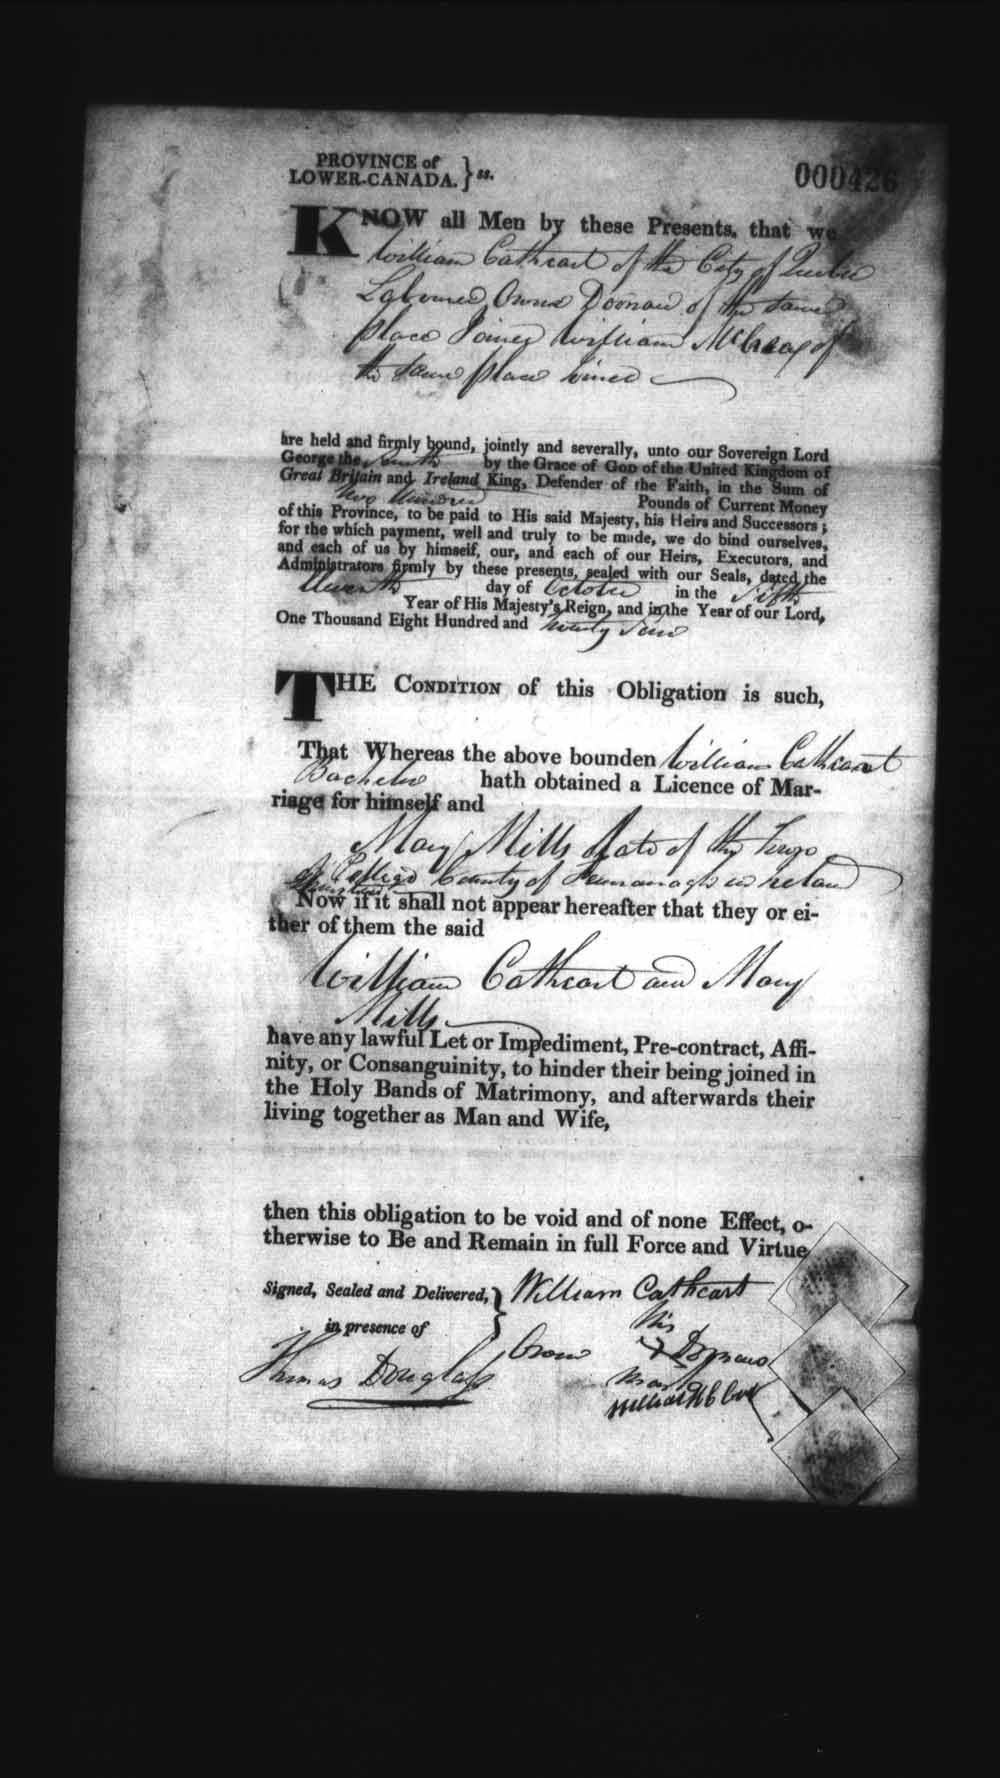 Digitized page of Upper and Lower Canada Marriage Bonds (1779-1865) for Image No.: e008236330